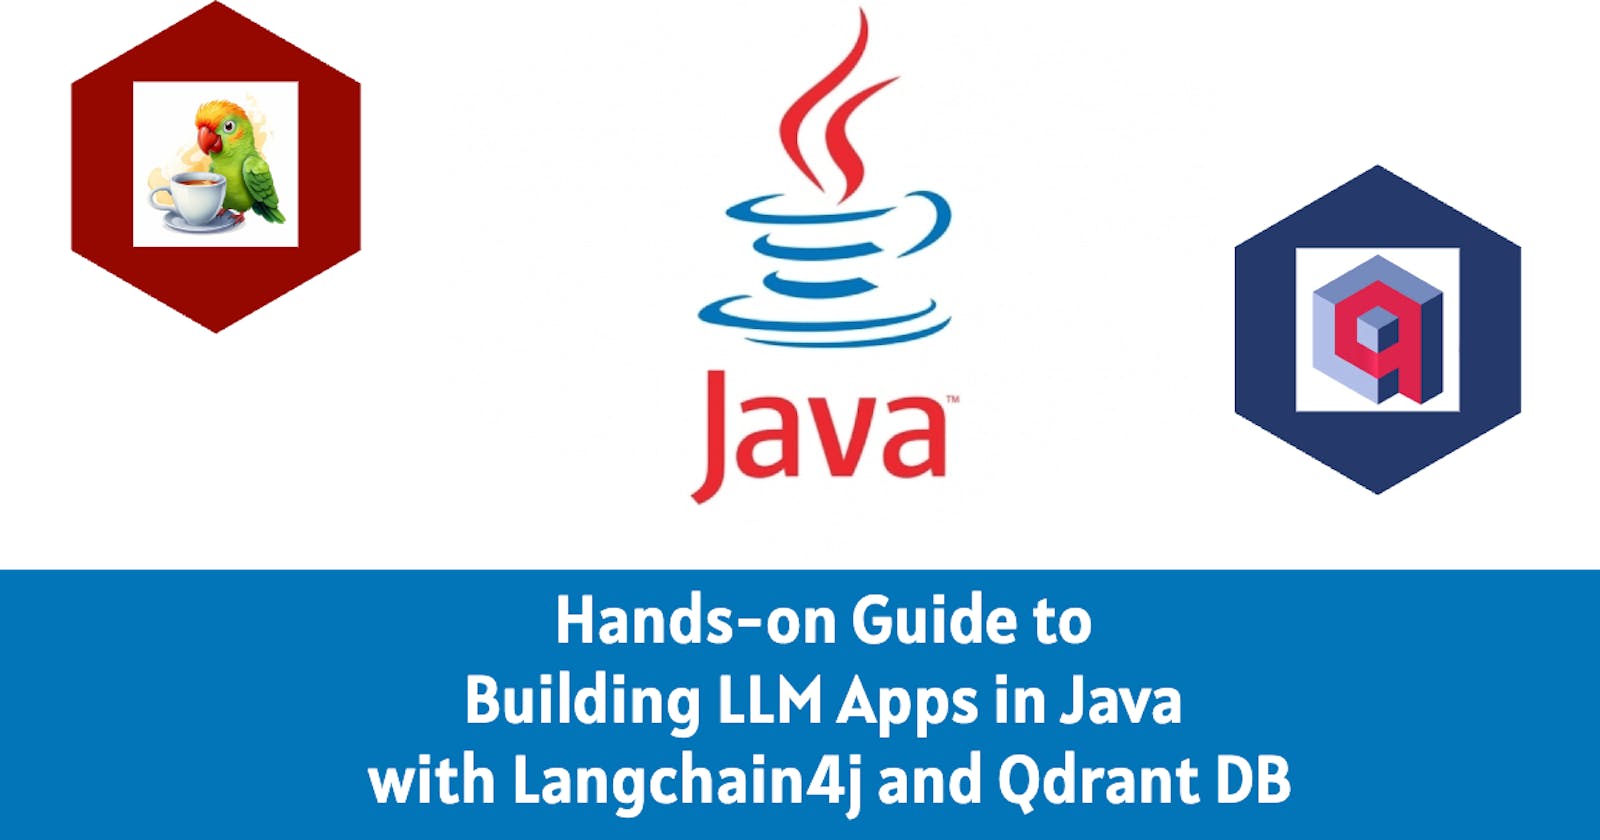 Hands-on Guide to Building LLM Apps in Java with Langchain4j and Qdrant DB